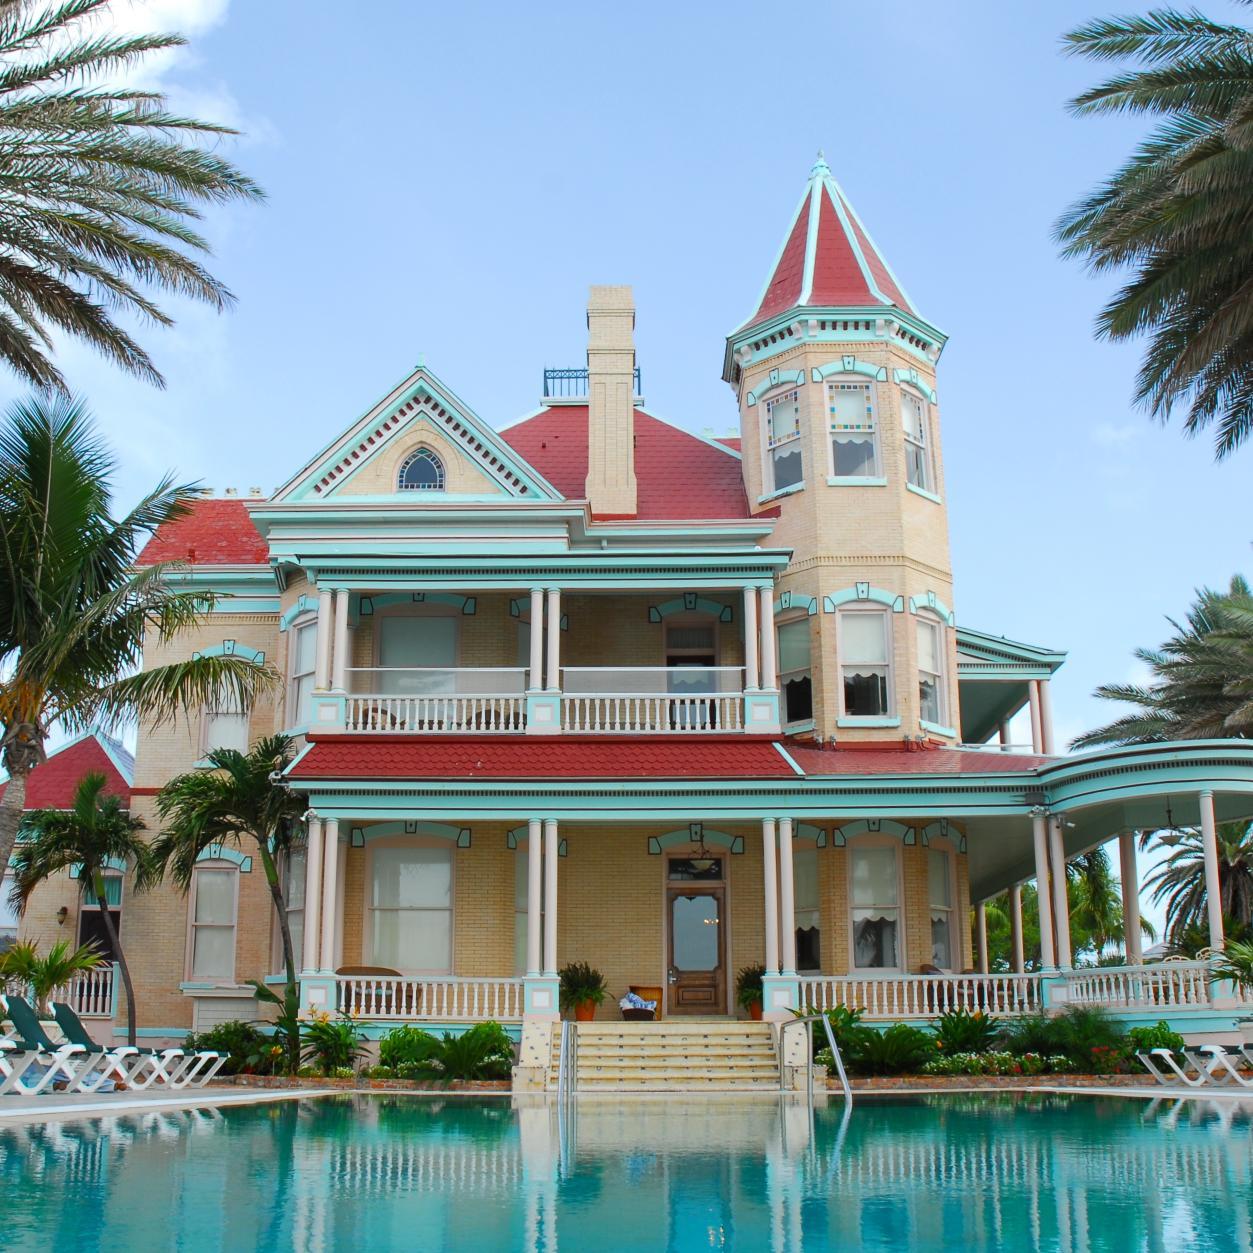 Journey back in time at the magnificent Southernmost House Historic Key West Inn on the ocean's edge. Reservations 1-877-552-9821.